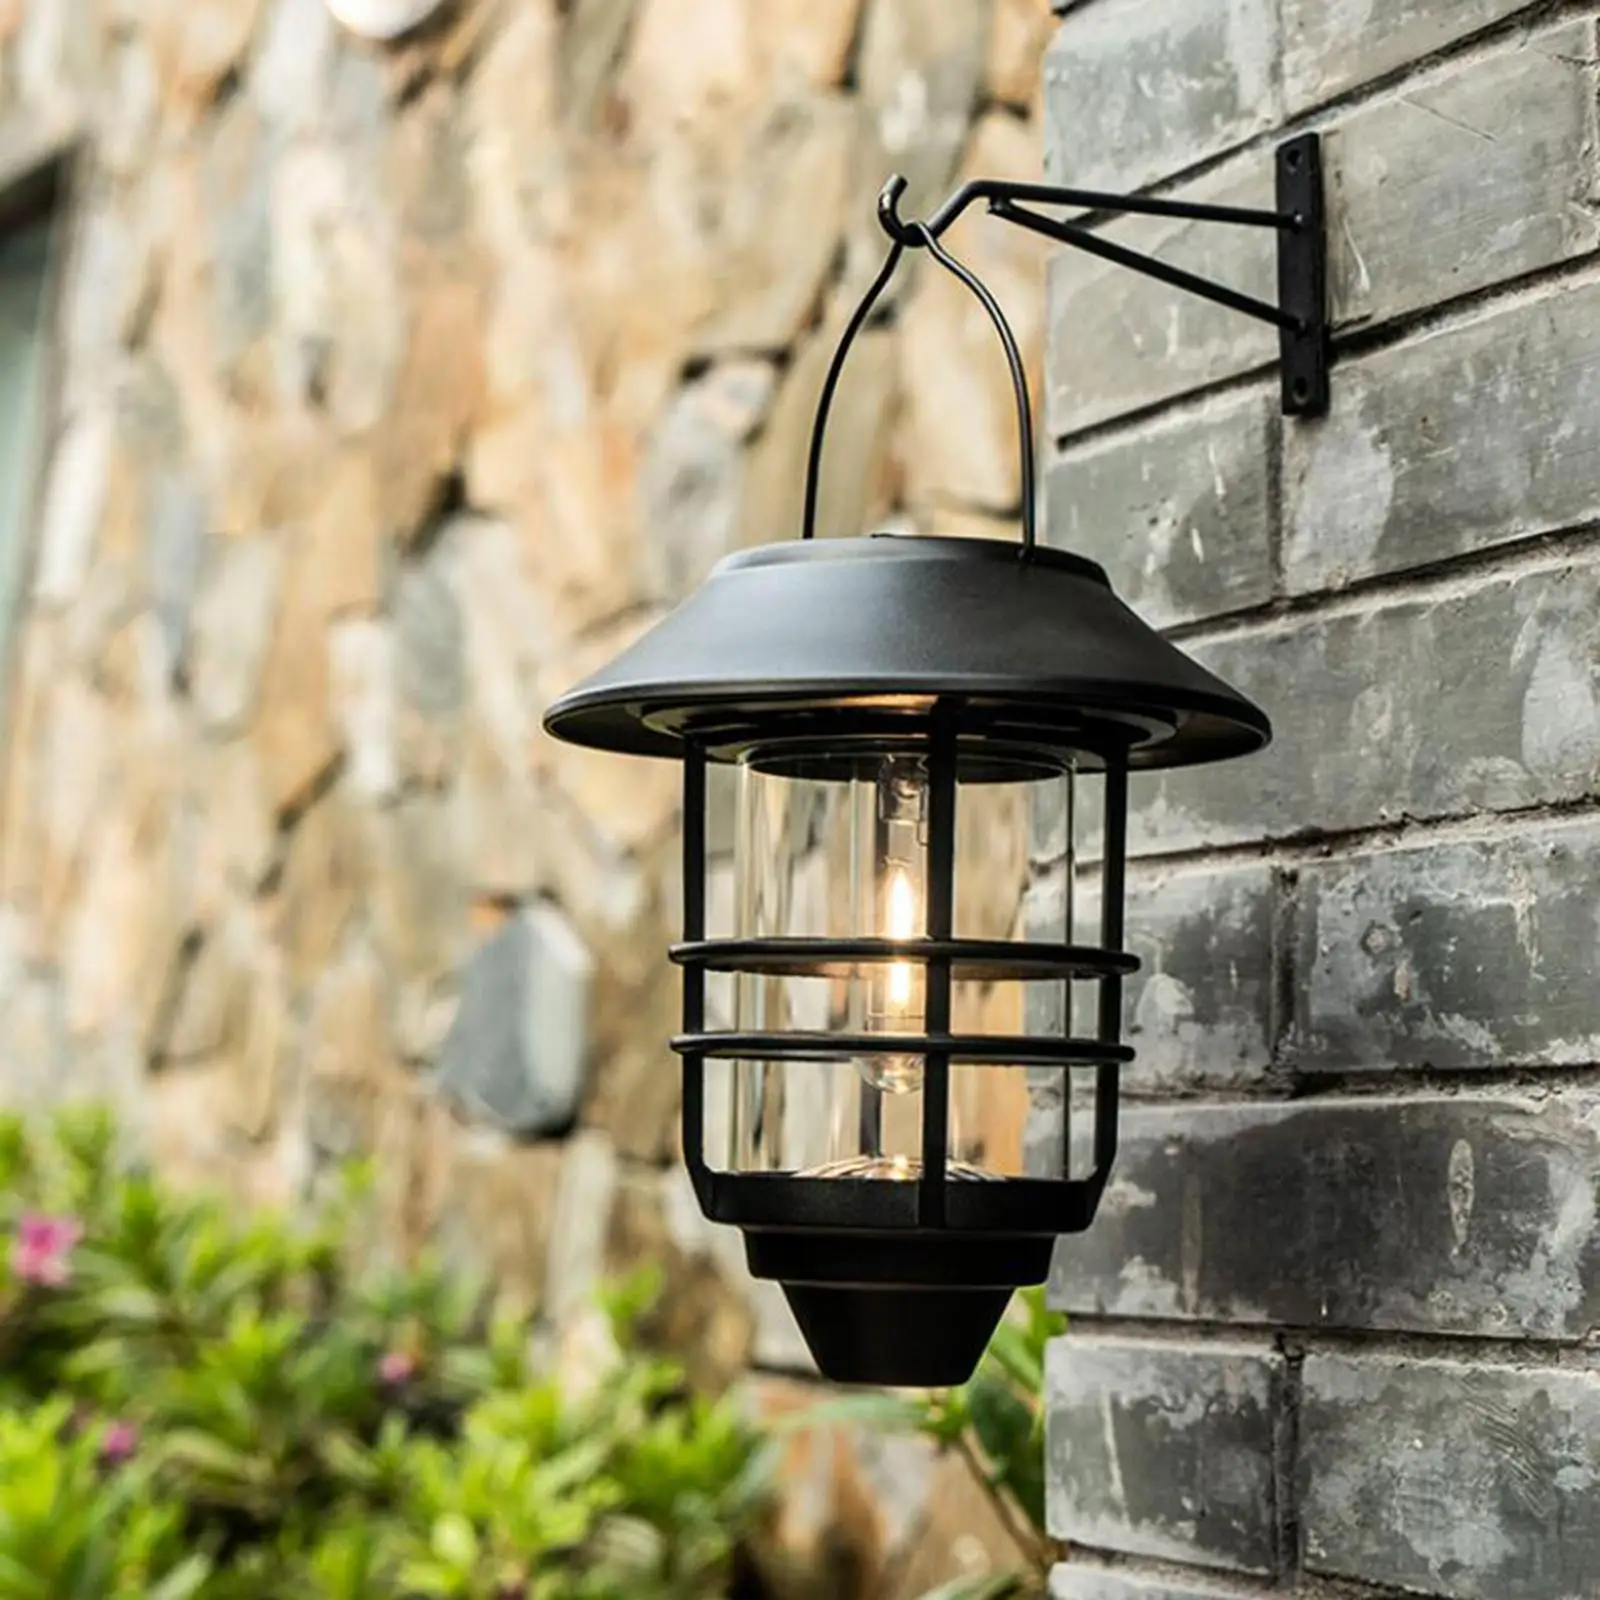 Solar Power Hanging Lantern Light Fixture Lamp Warm White Waterproof Sconce LED Metal for Yard Porch Courtyard Patio Wall